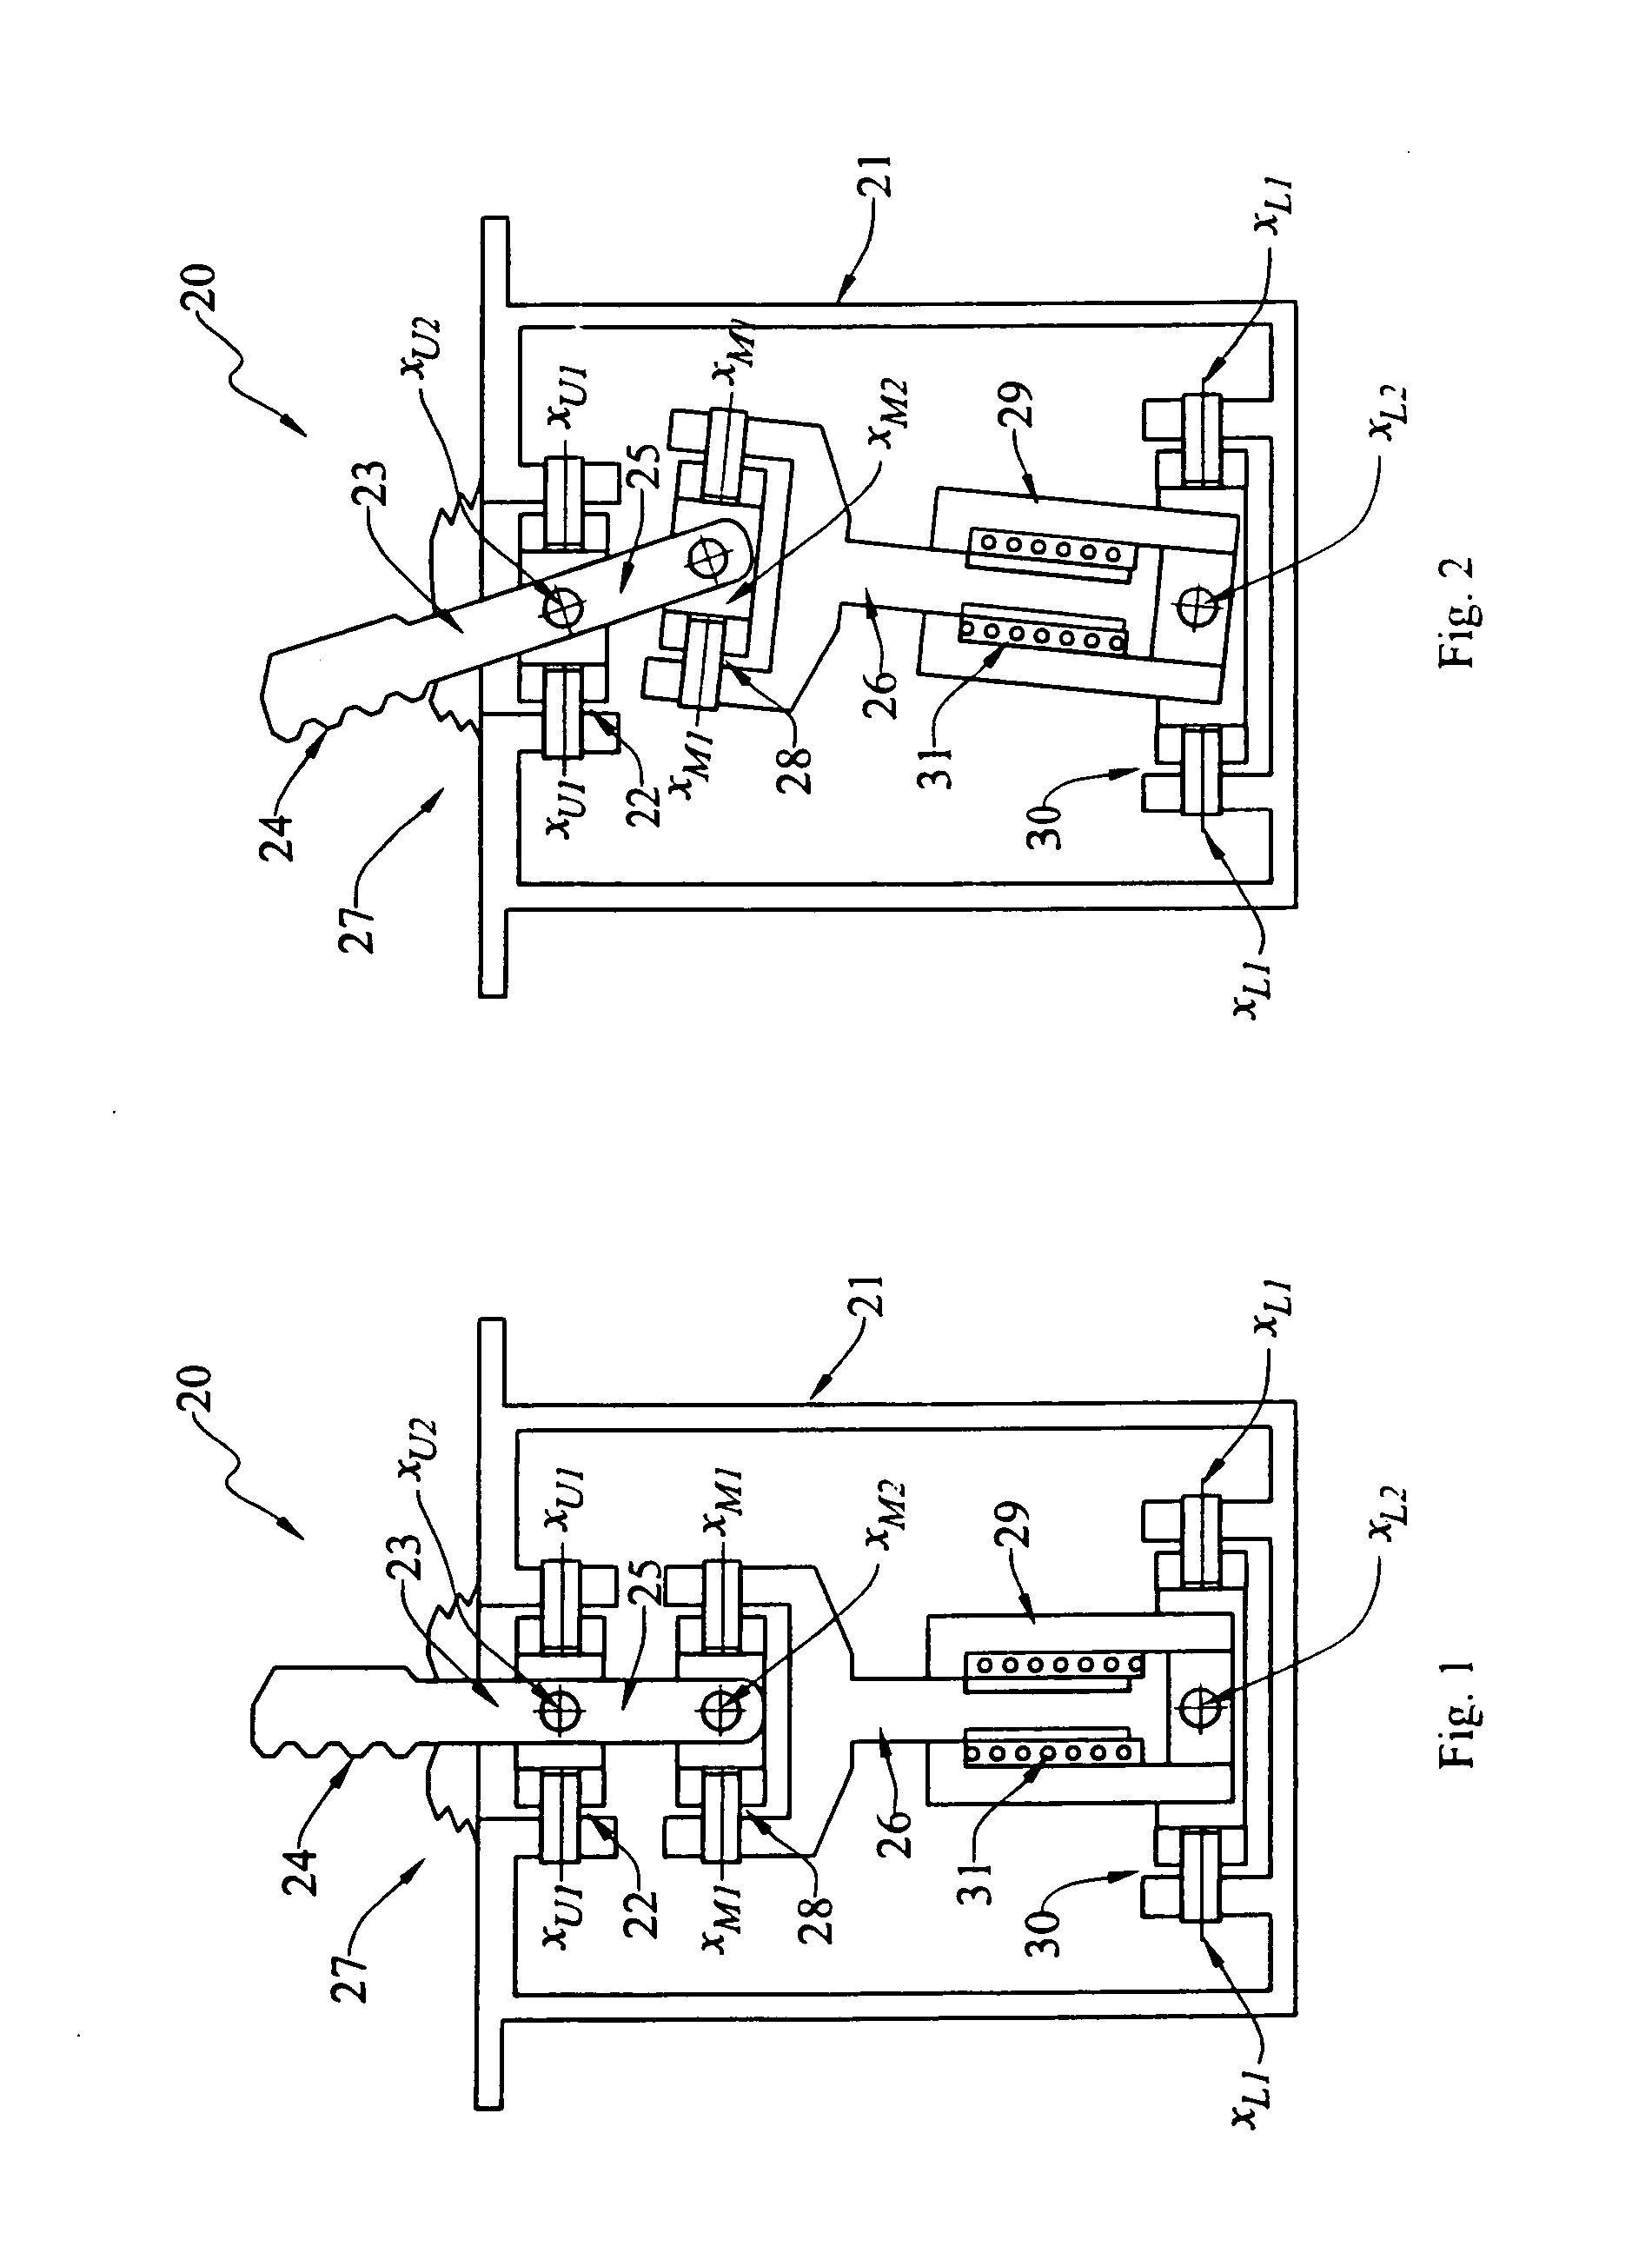 Control stick adapted for use in a fly-by-wire flight control system, and linkage for use therein